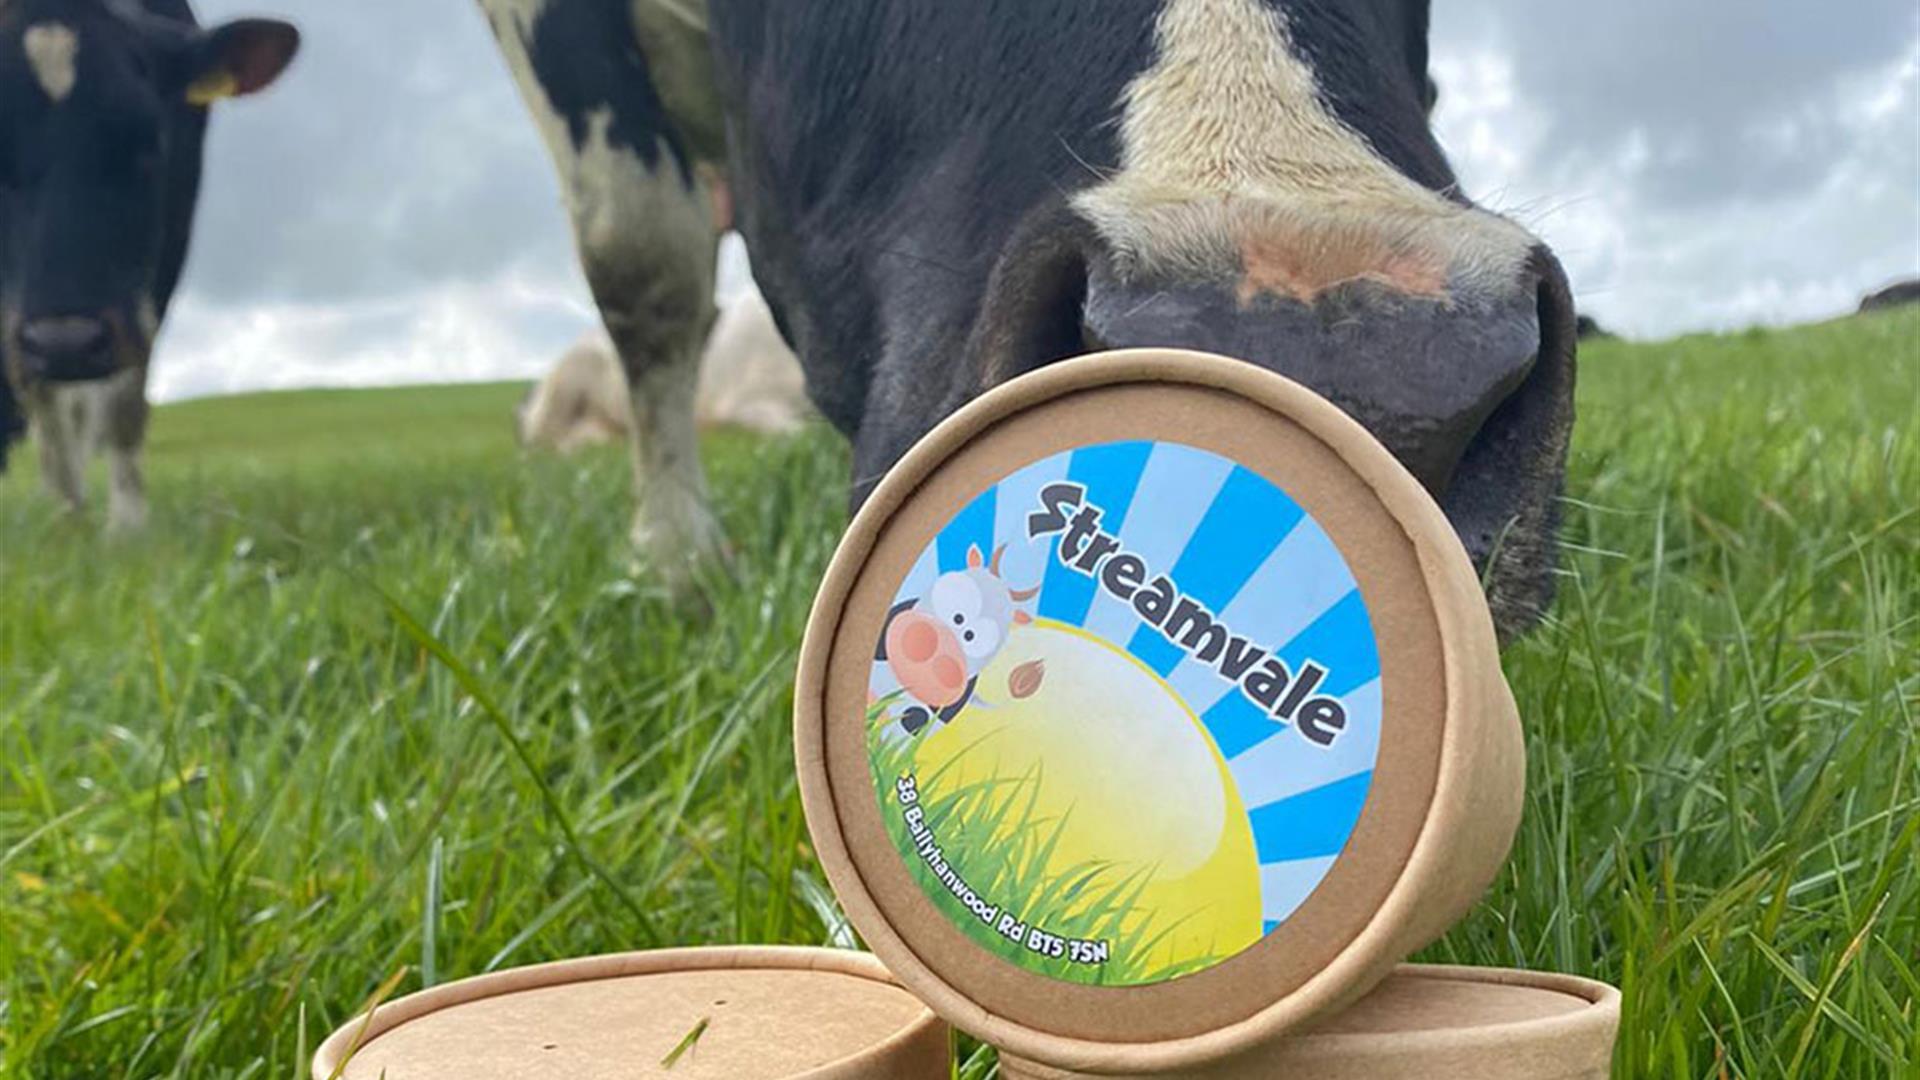 Image shows cartons of ice-cream with a cow in a field nudging one of the cartons